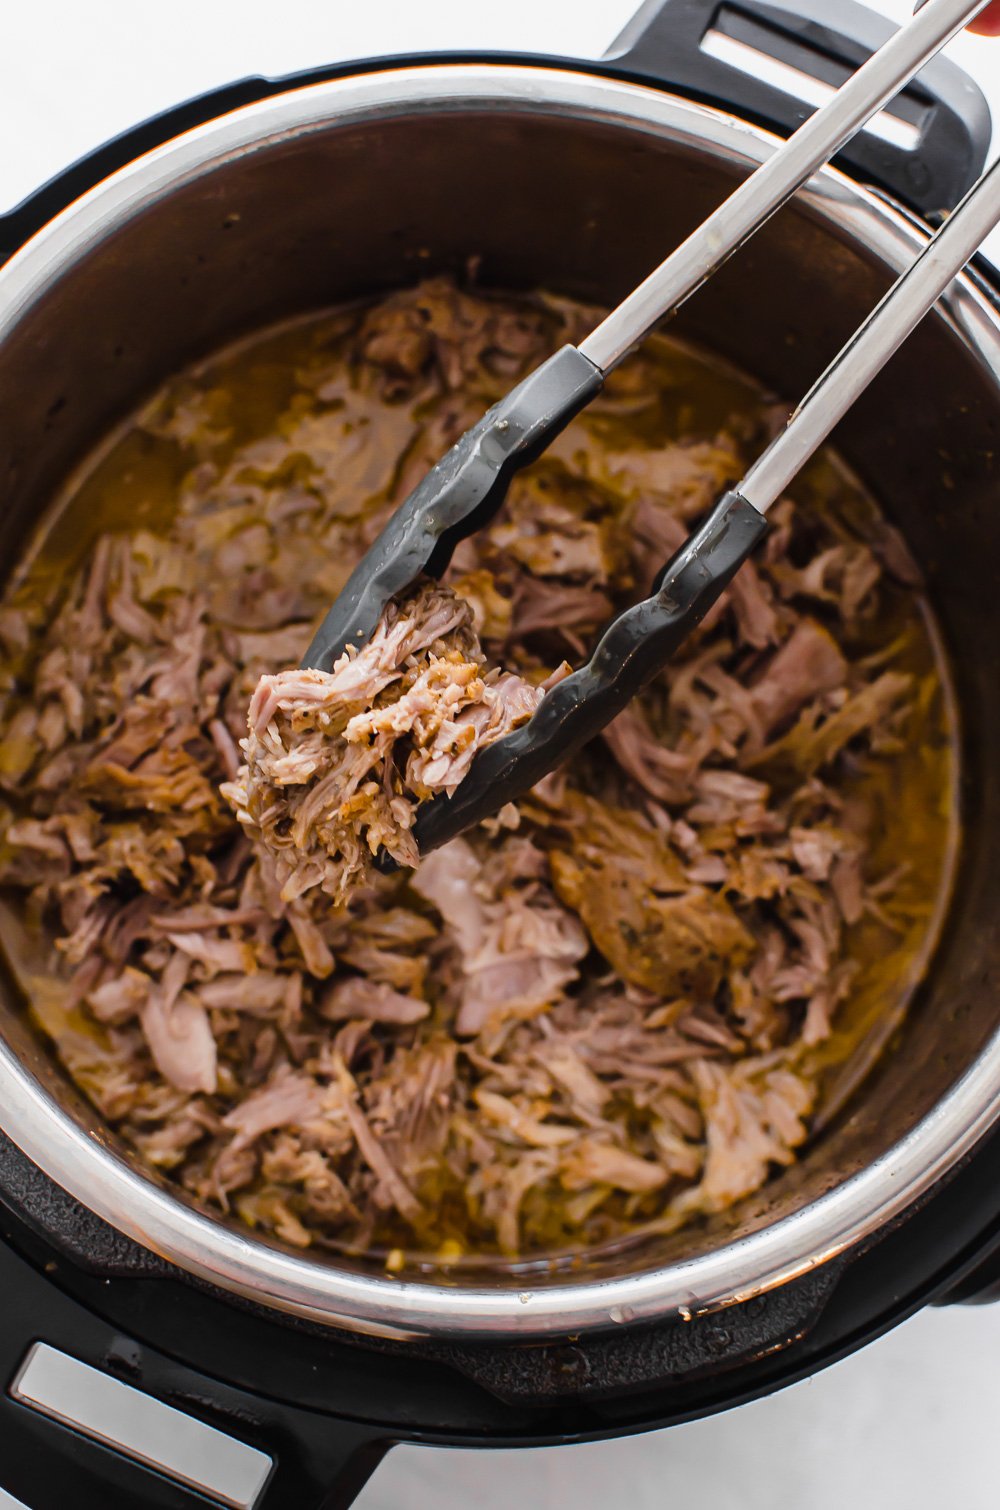 Tongs lifting shredded pork shoulder out of an Instant Pot.